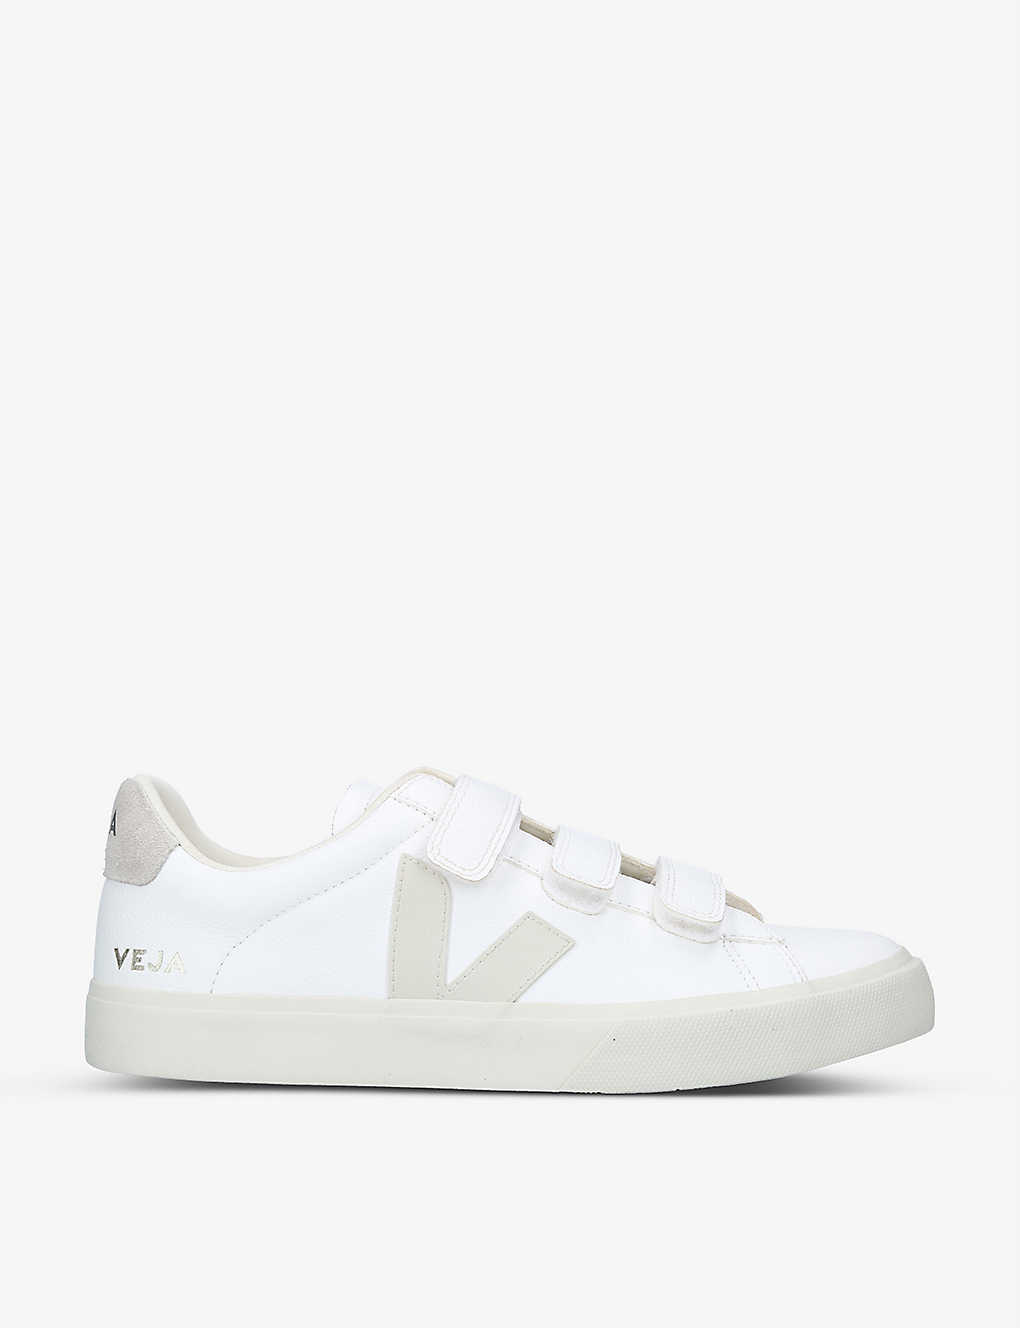 Veja Men's White/oth Men's Recife Leather Low-top Trainers